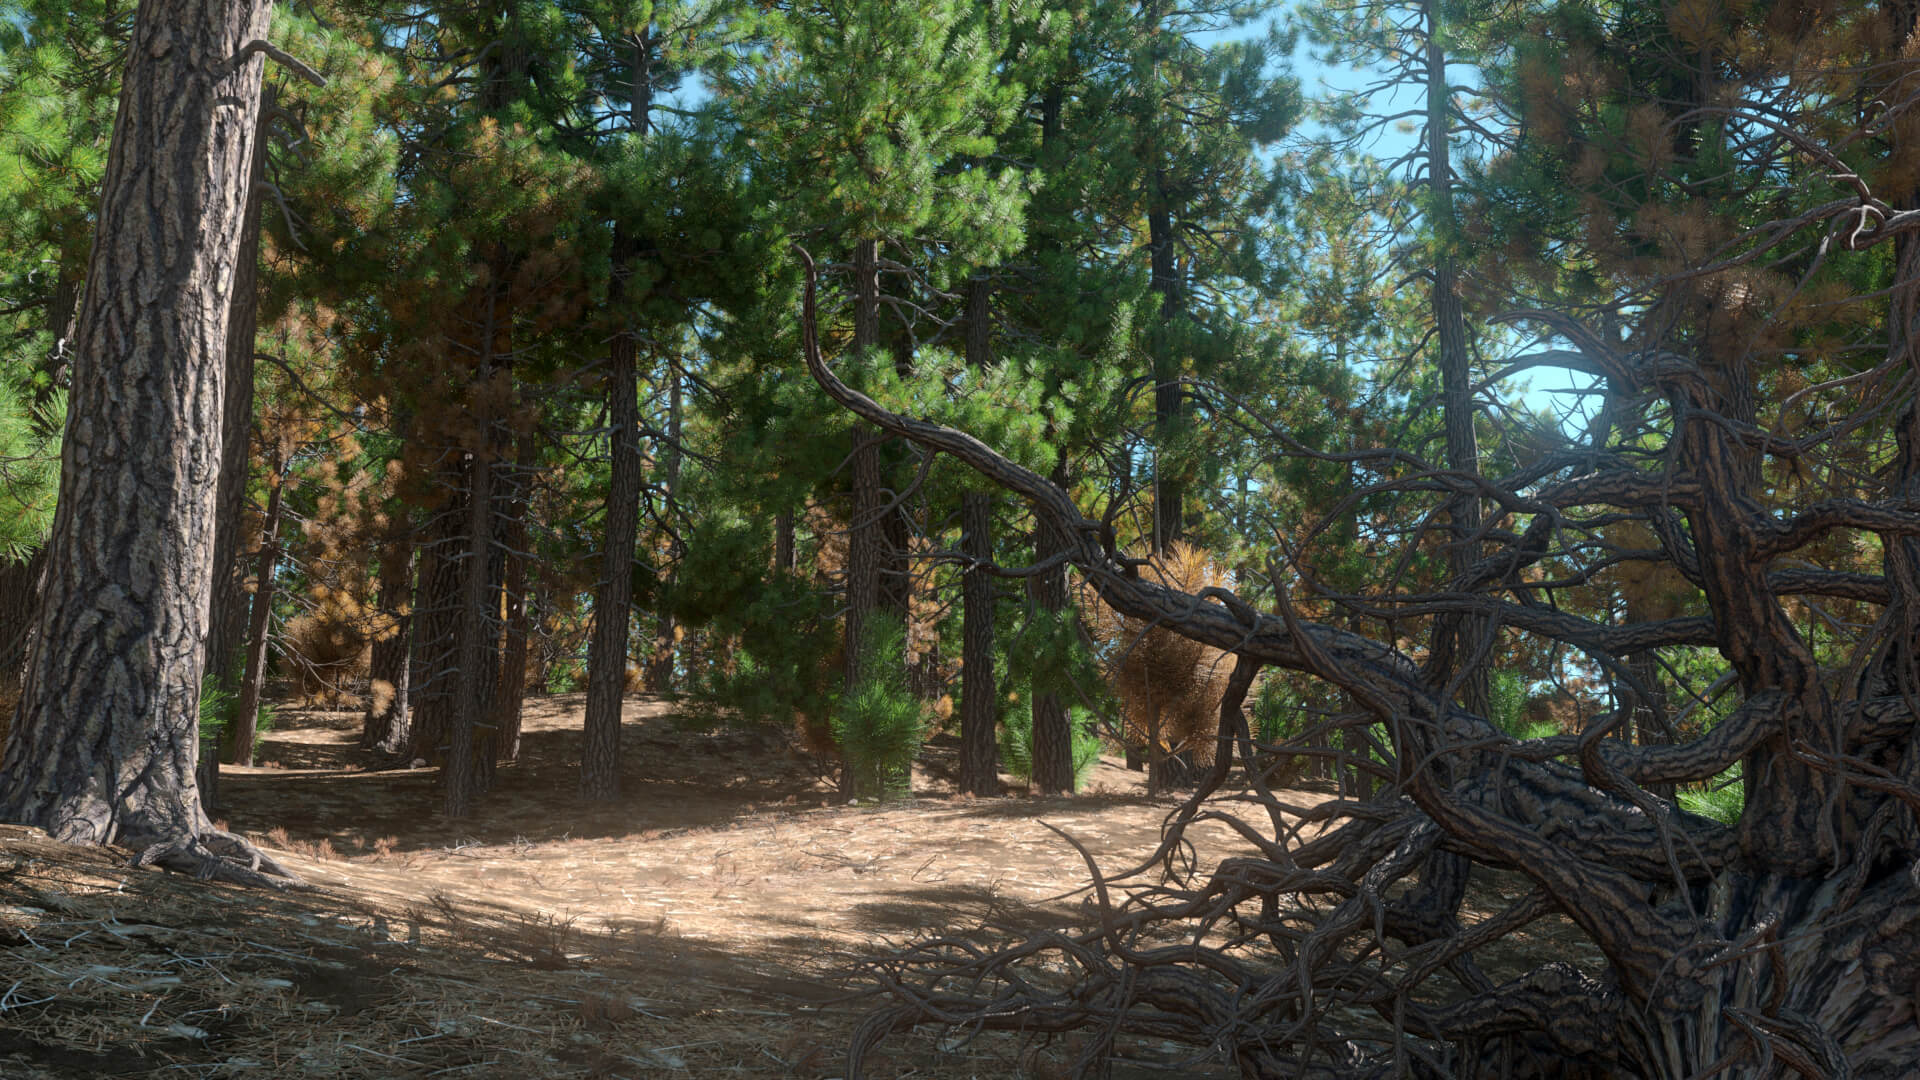 3D model of the Ponderosa pine uprooted Pinus ponderosa uprooted